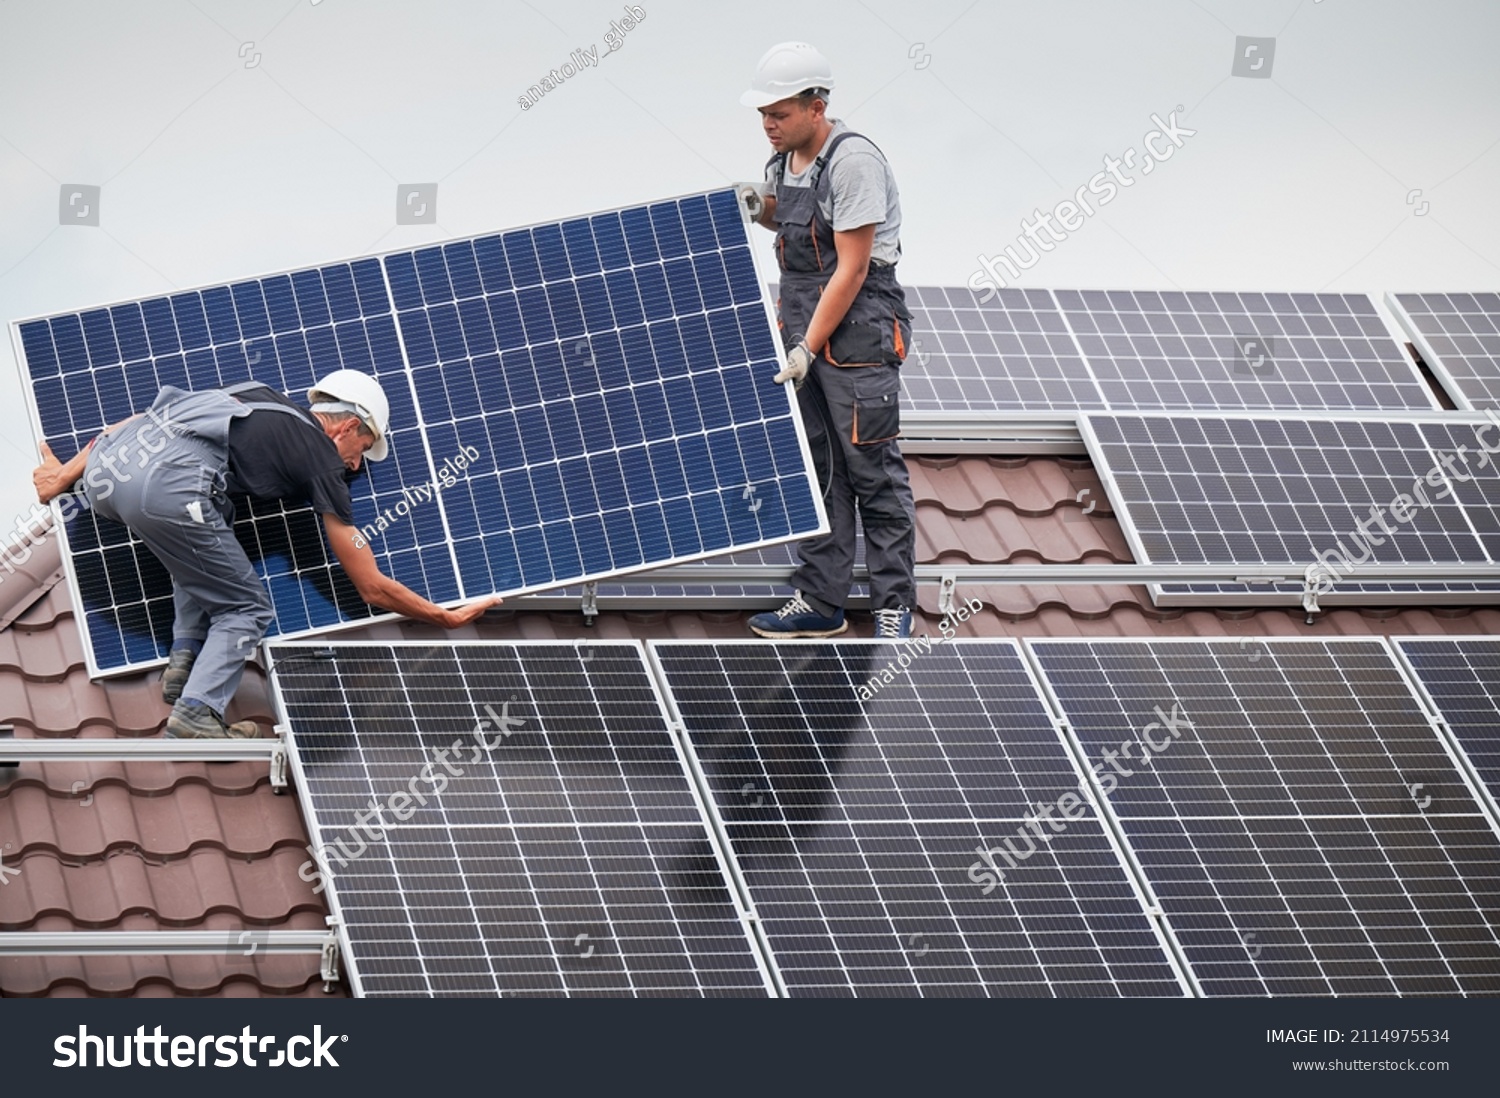 Men technicians carrying photovoltaic solar moduls on roof of house. Engineers in helmets installing solar panel system outdoors. Concept of alternative and renewable energy. #2114975534